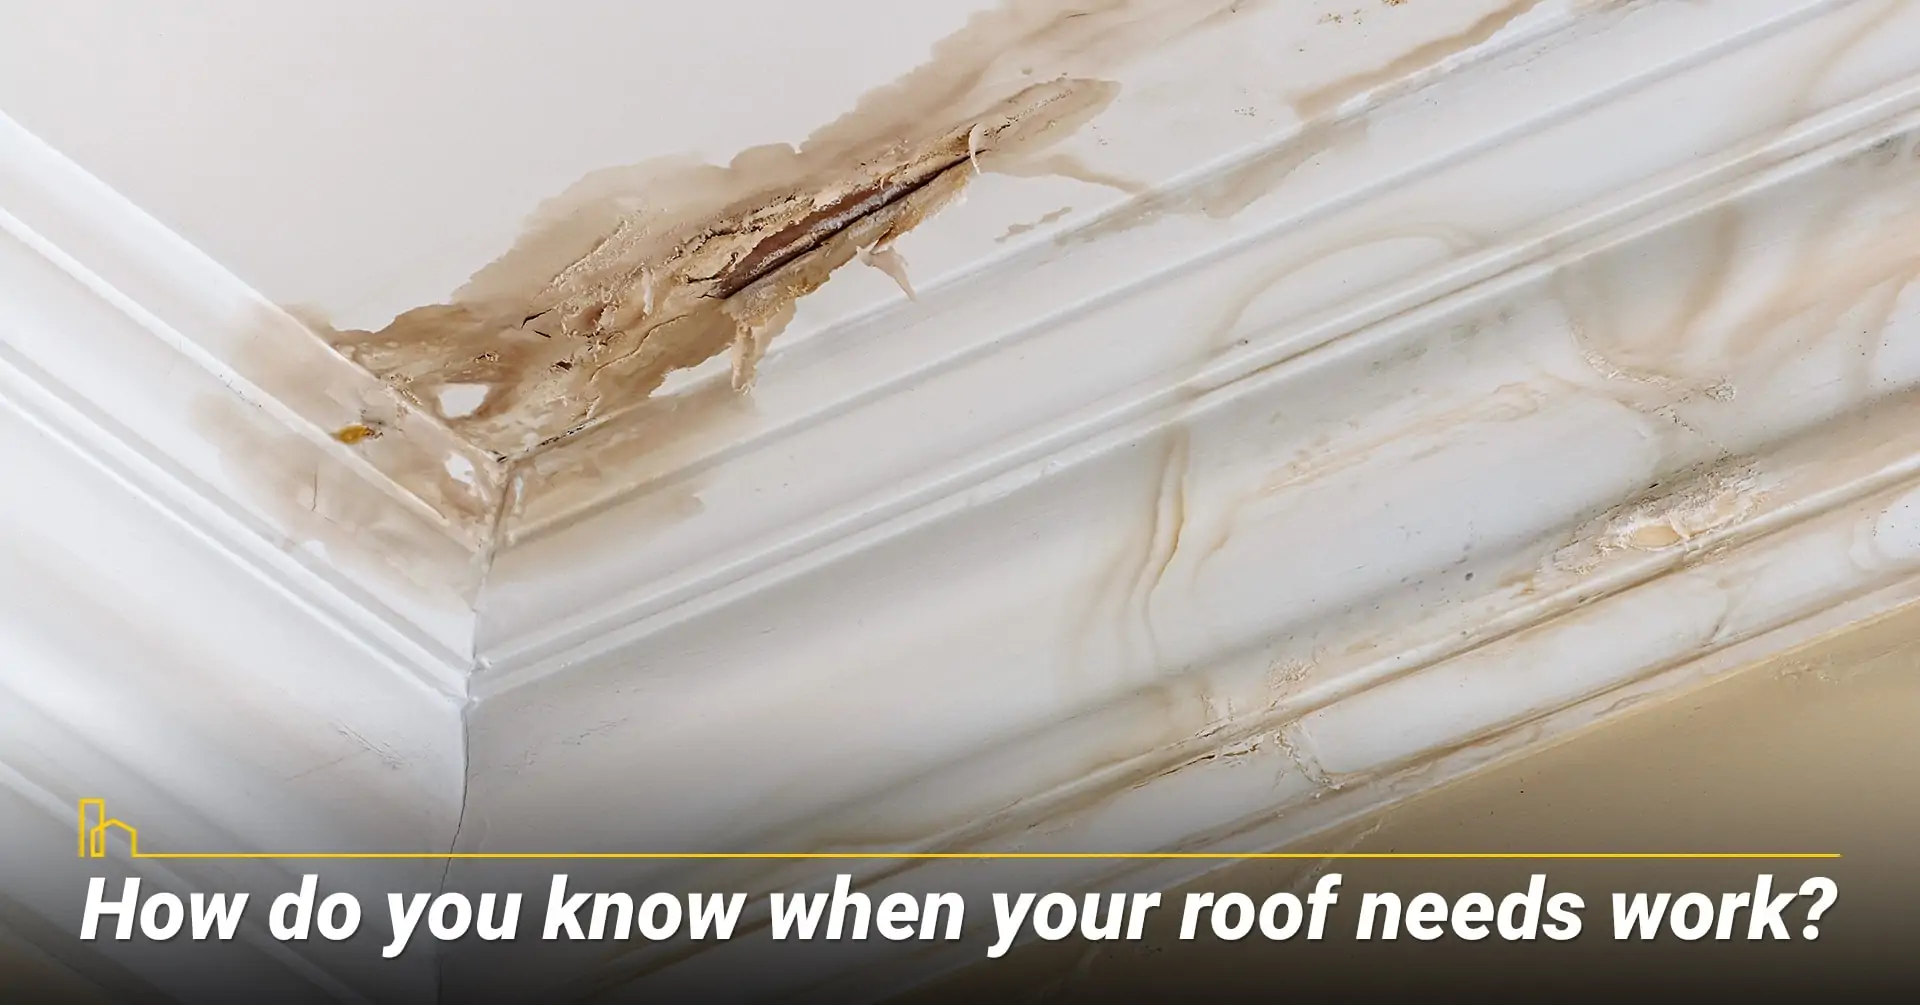 How do you know when your roof needs work? Review condition of the roof